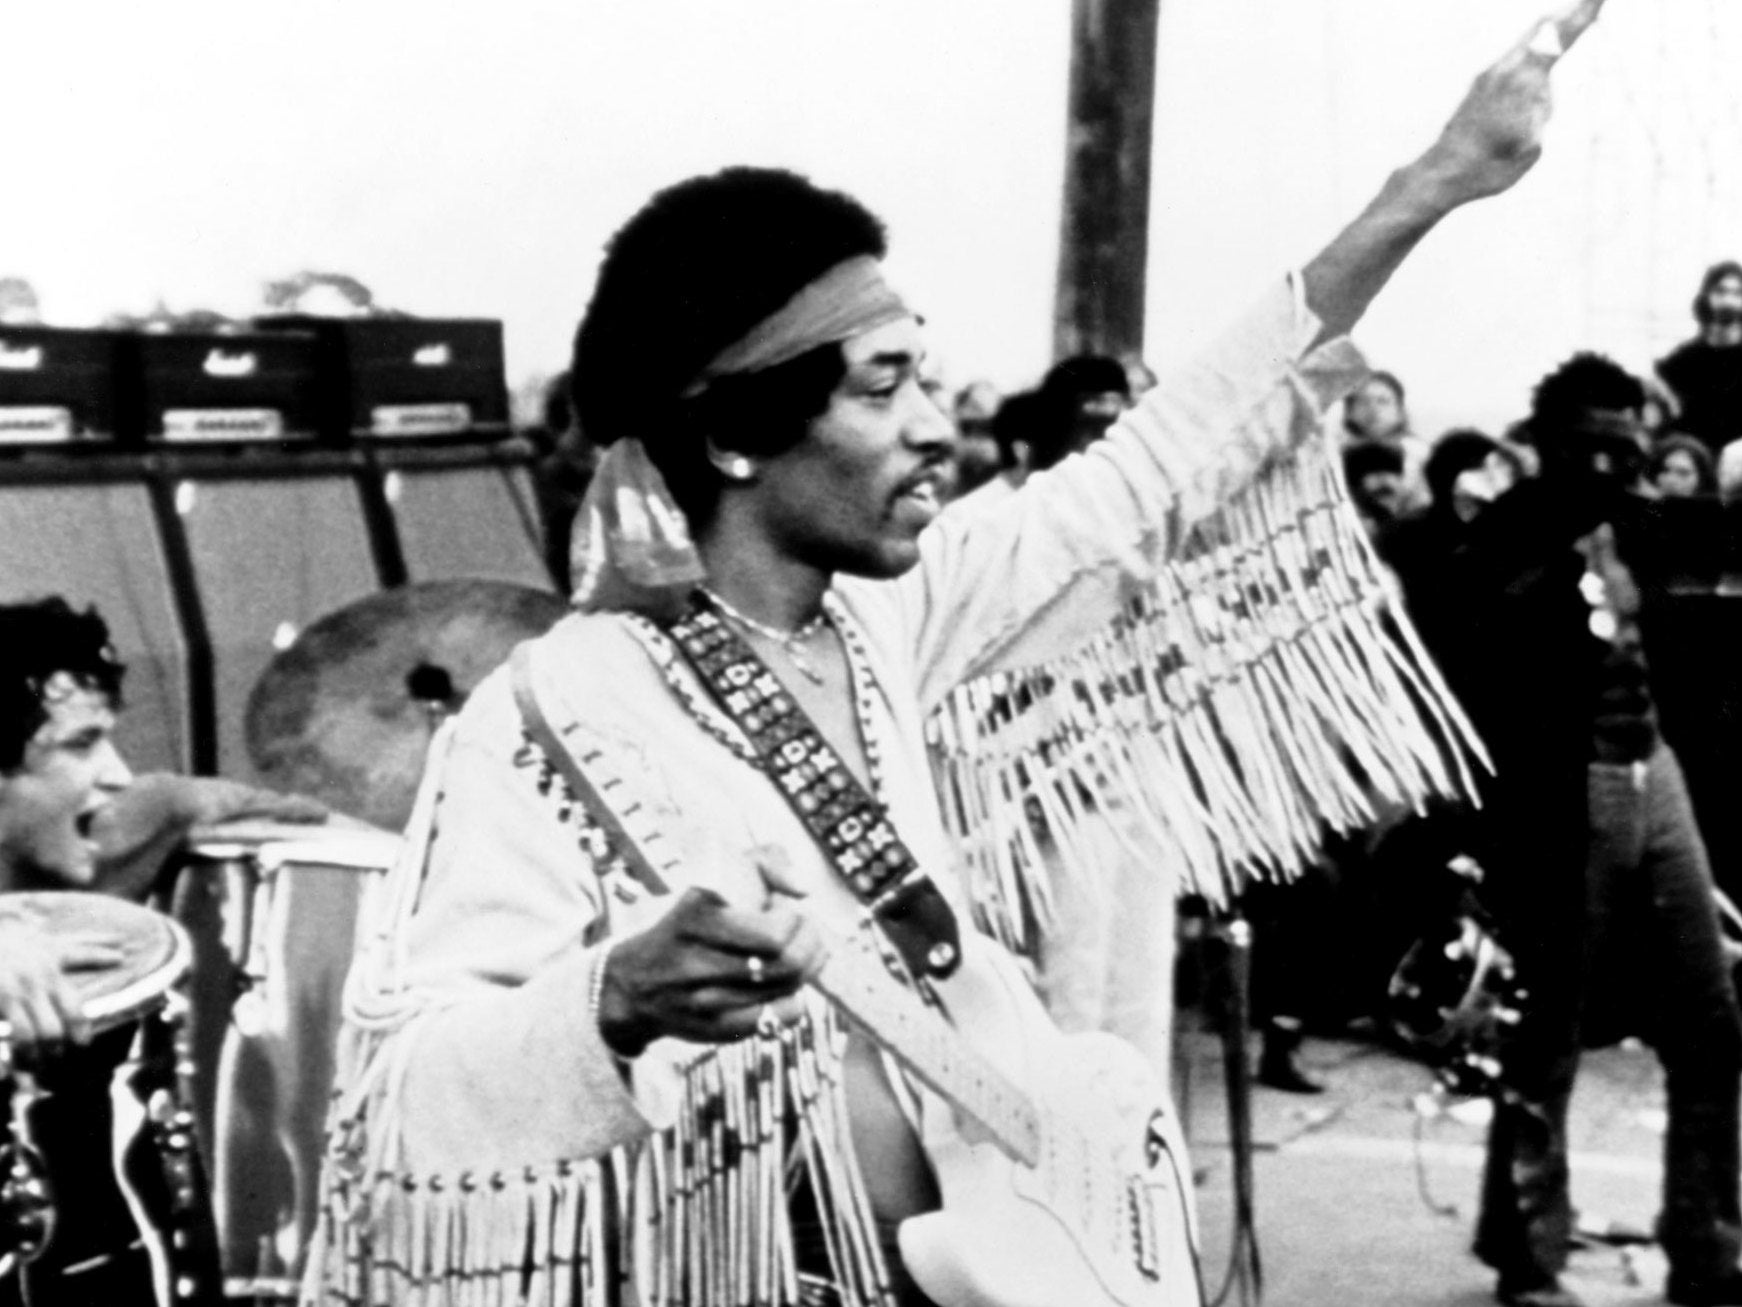 Culture and politics came together in Hendrix’s ‘Star Spangled Banner’ at Woodstock